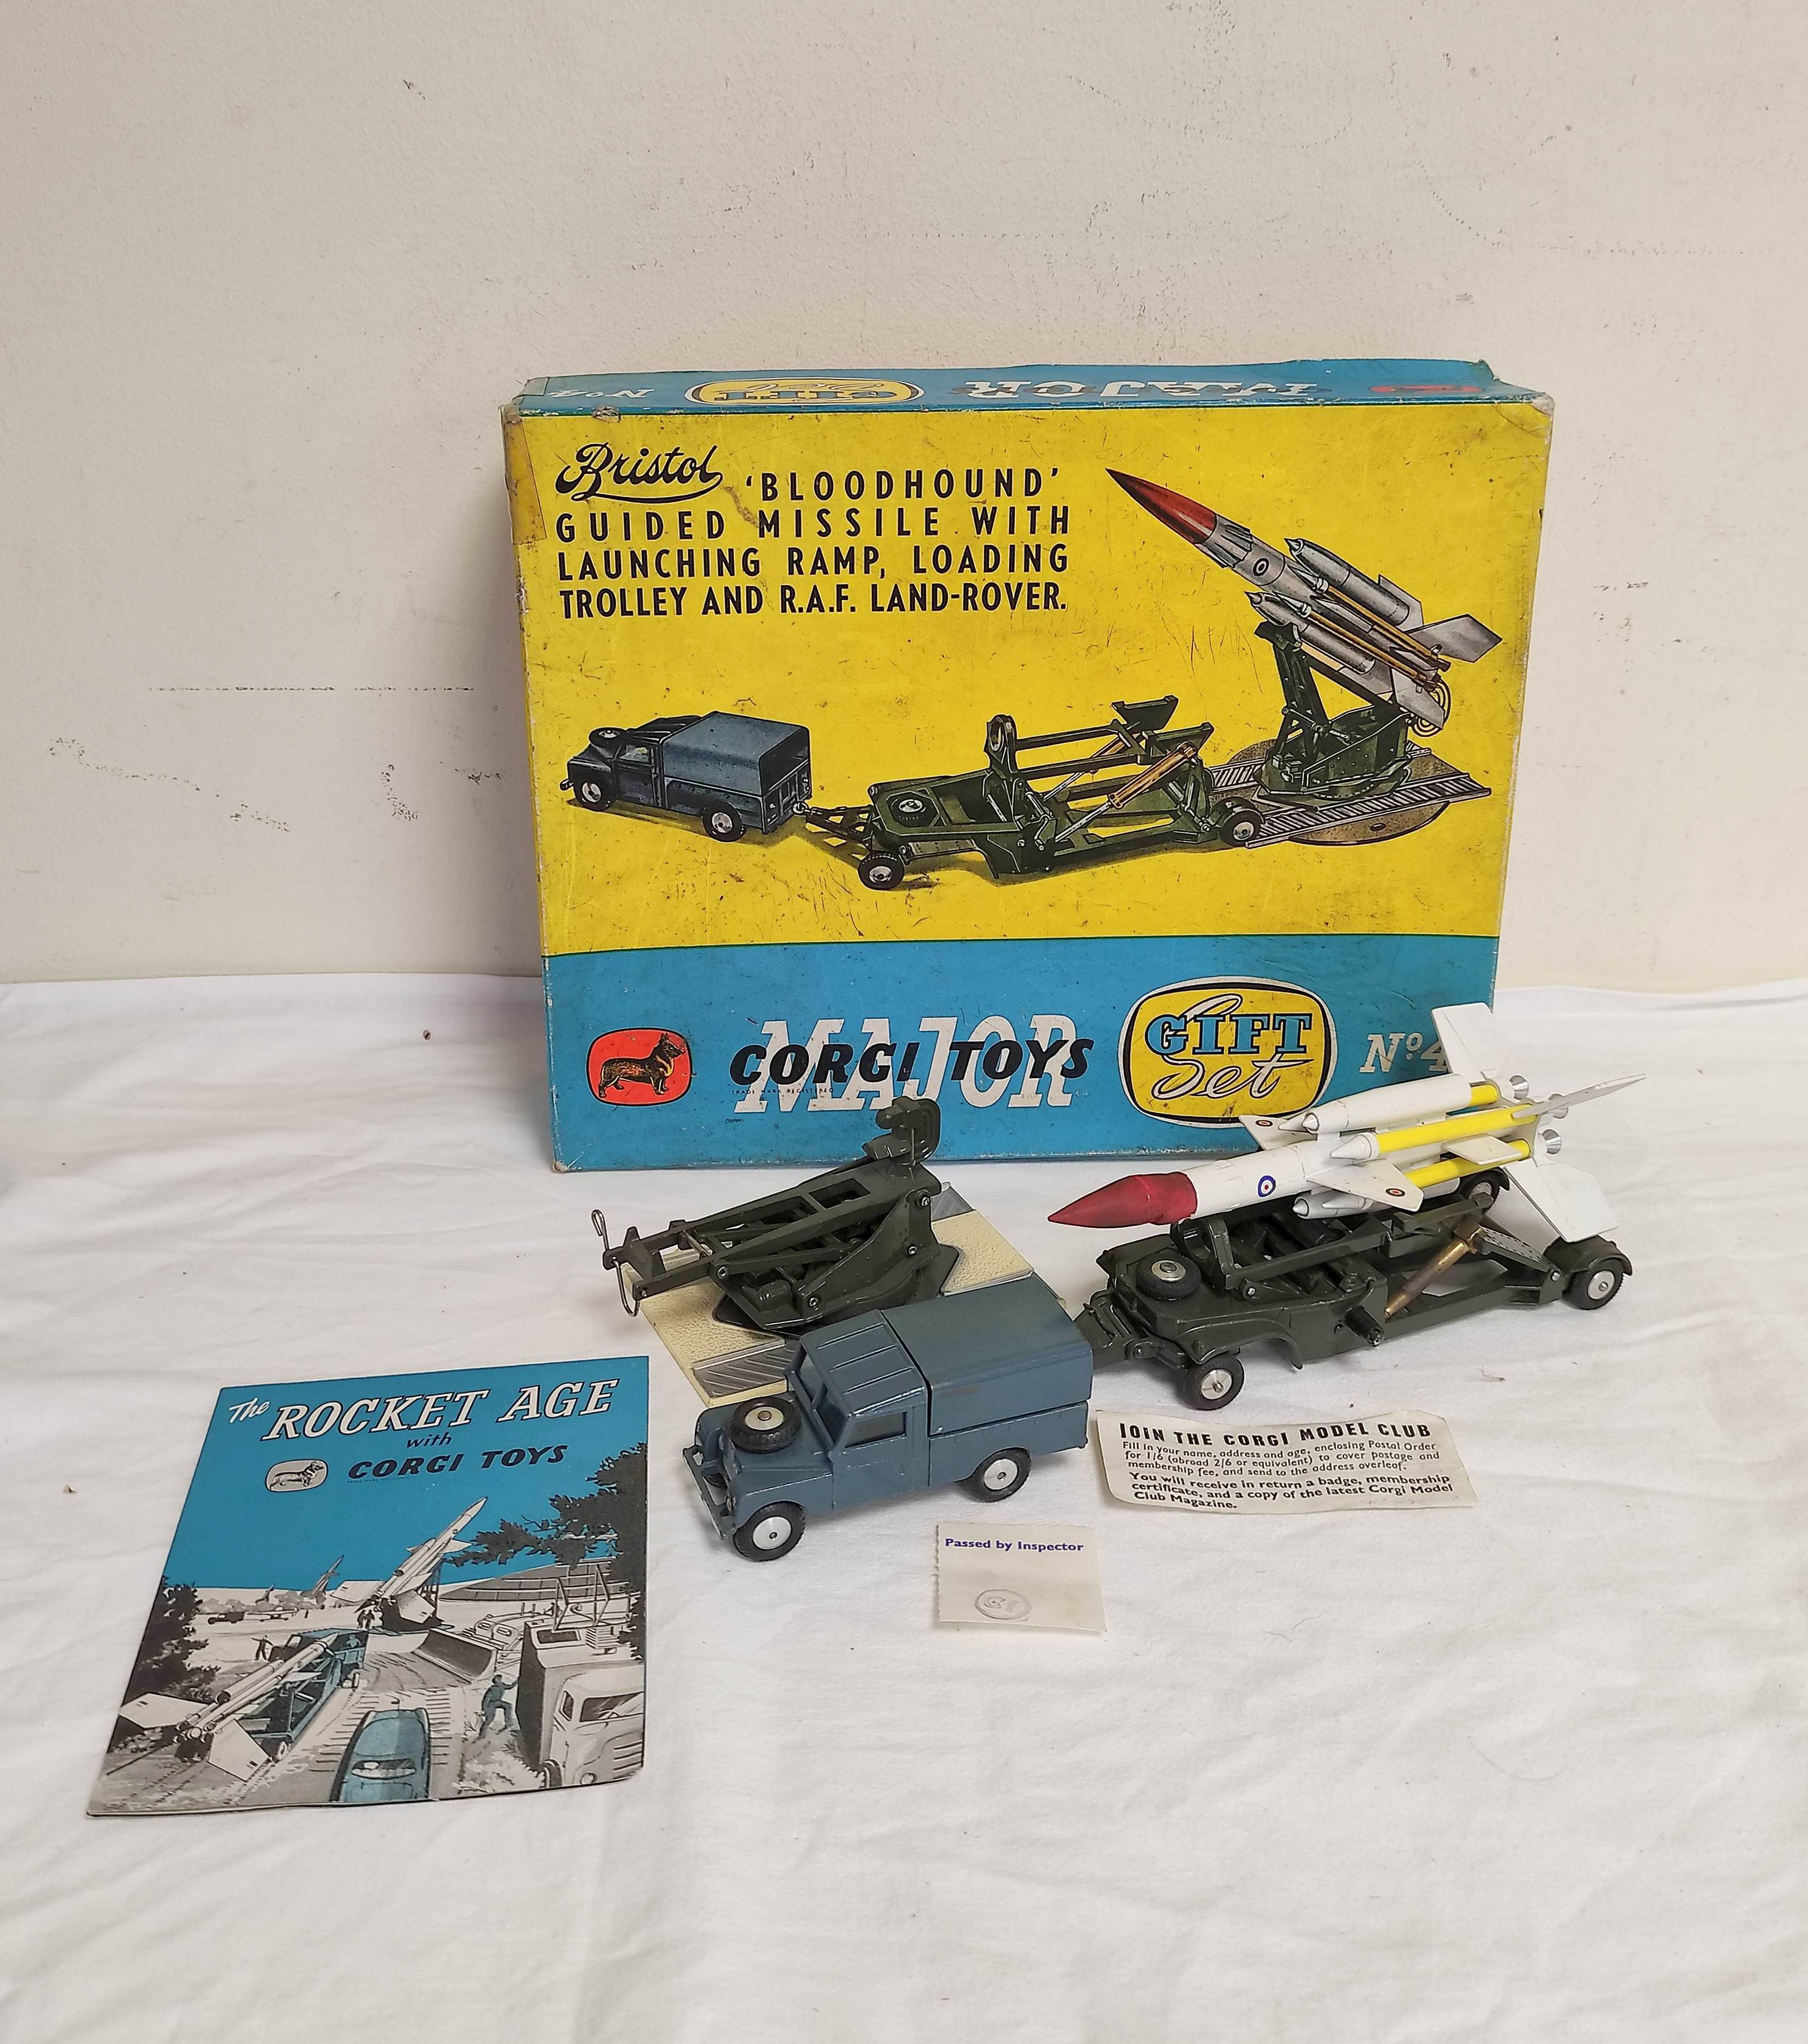 Corgi. Rocket Age Gift Sets to include No 4 Bristol Bloodhound Guided Missile With Launching Ramp, - Image 2 of 12